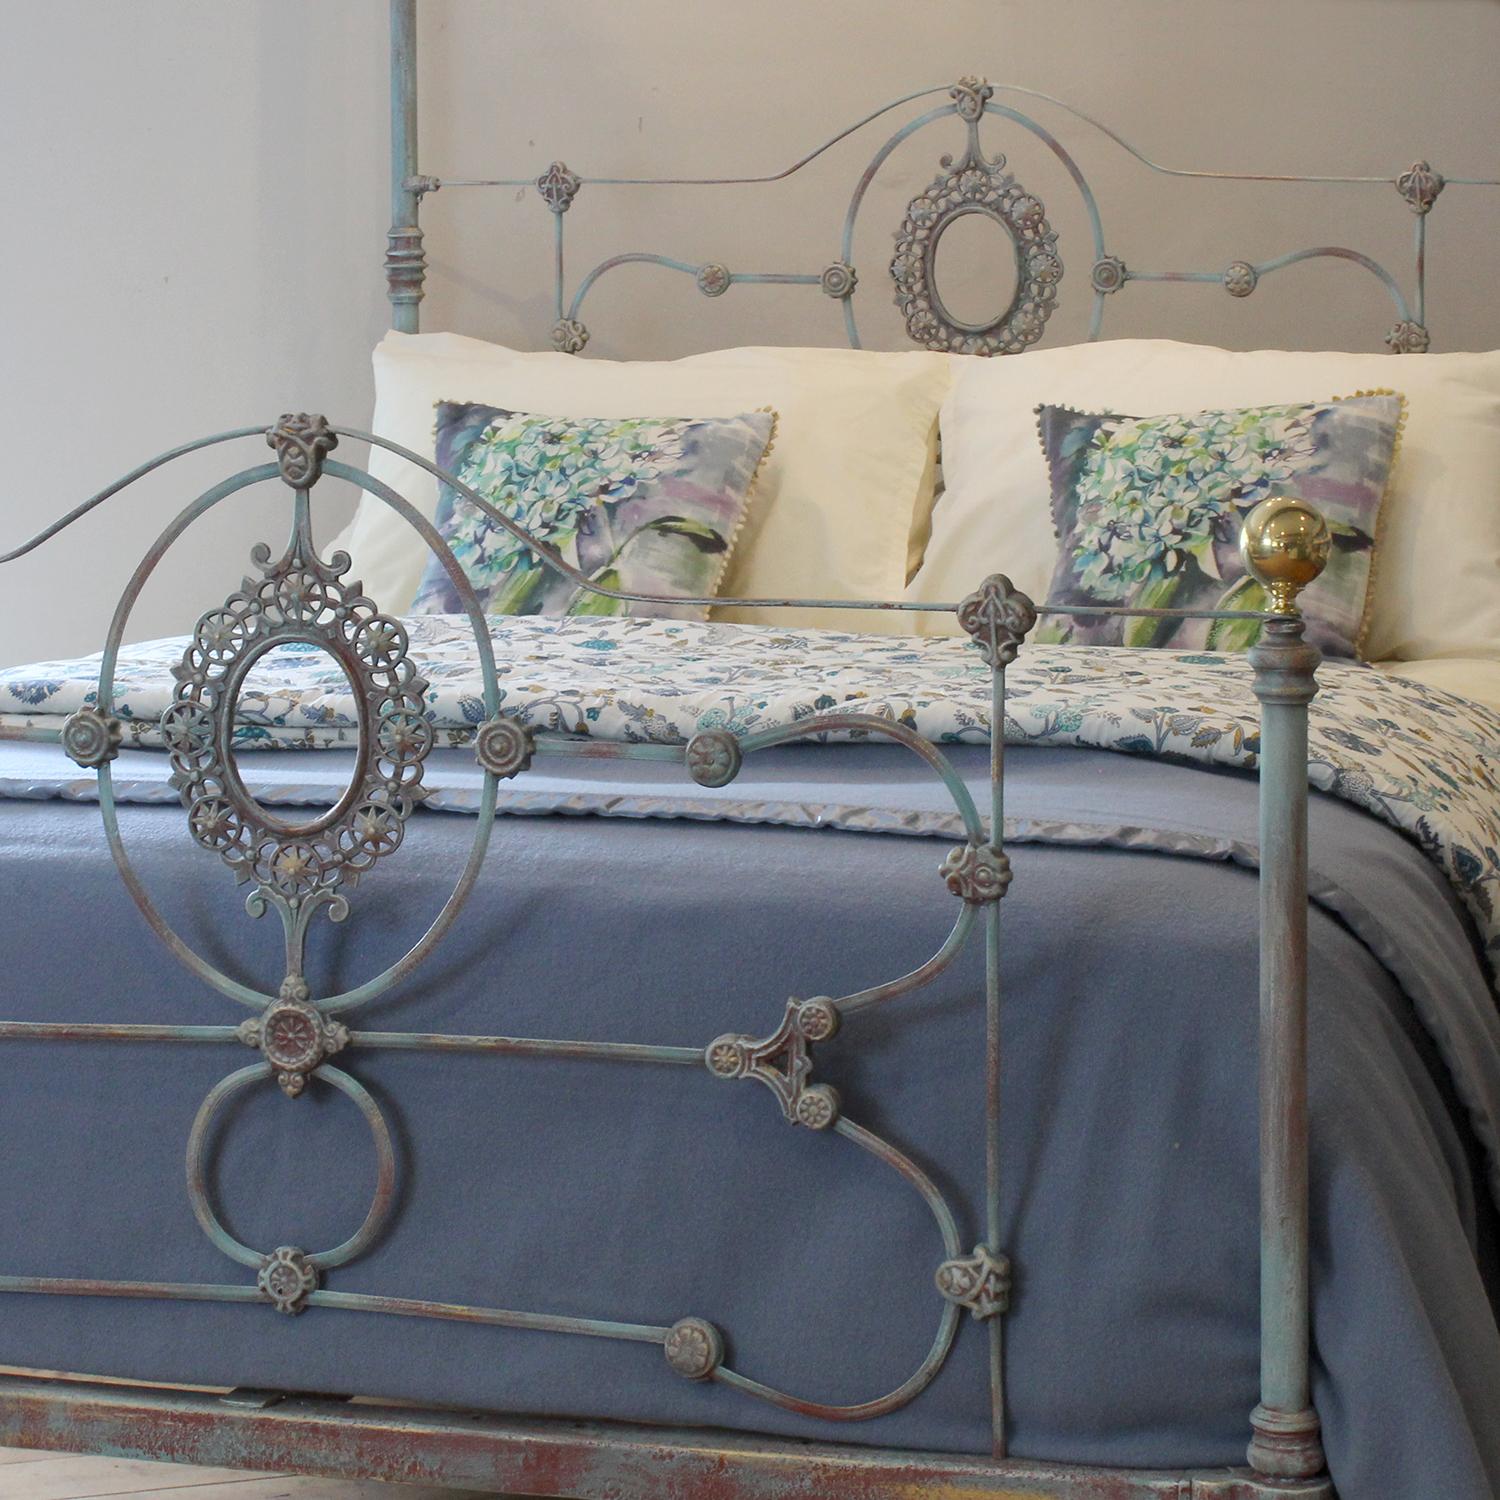 Beautifully painted Victorian half tester bedstead in our hand painted blue verdigris with decorative panels and central plaques in both head and foot panels. Circa 1880.

A firm bed base is included in the price. 

Mattress, bedding, bed linen